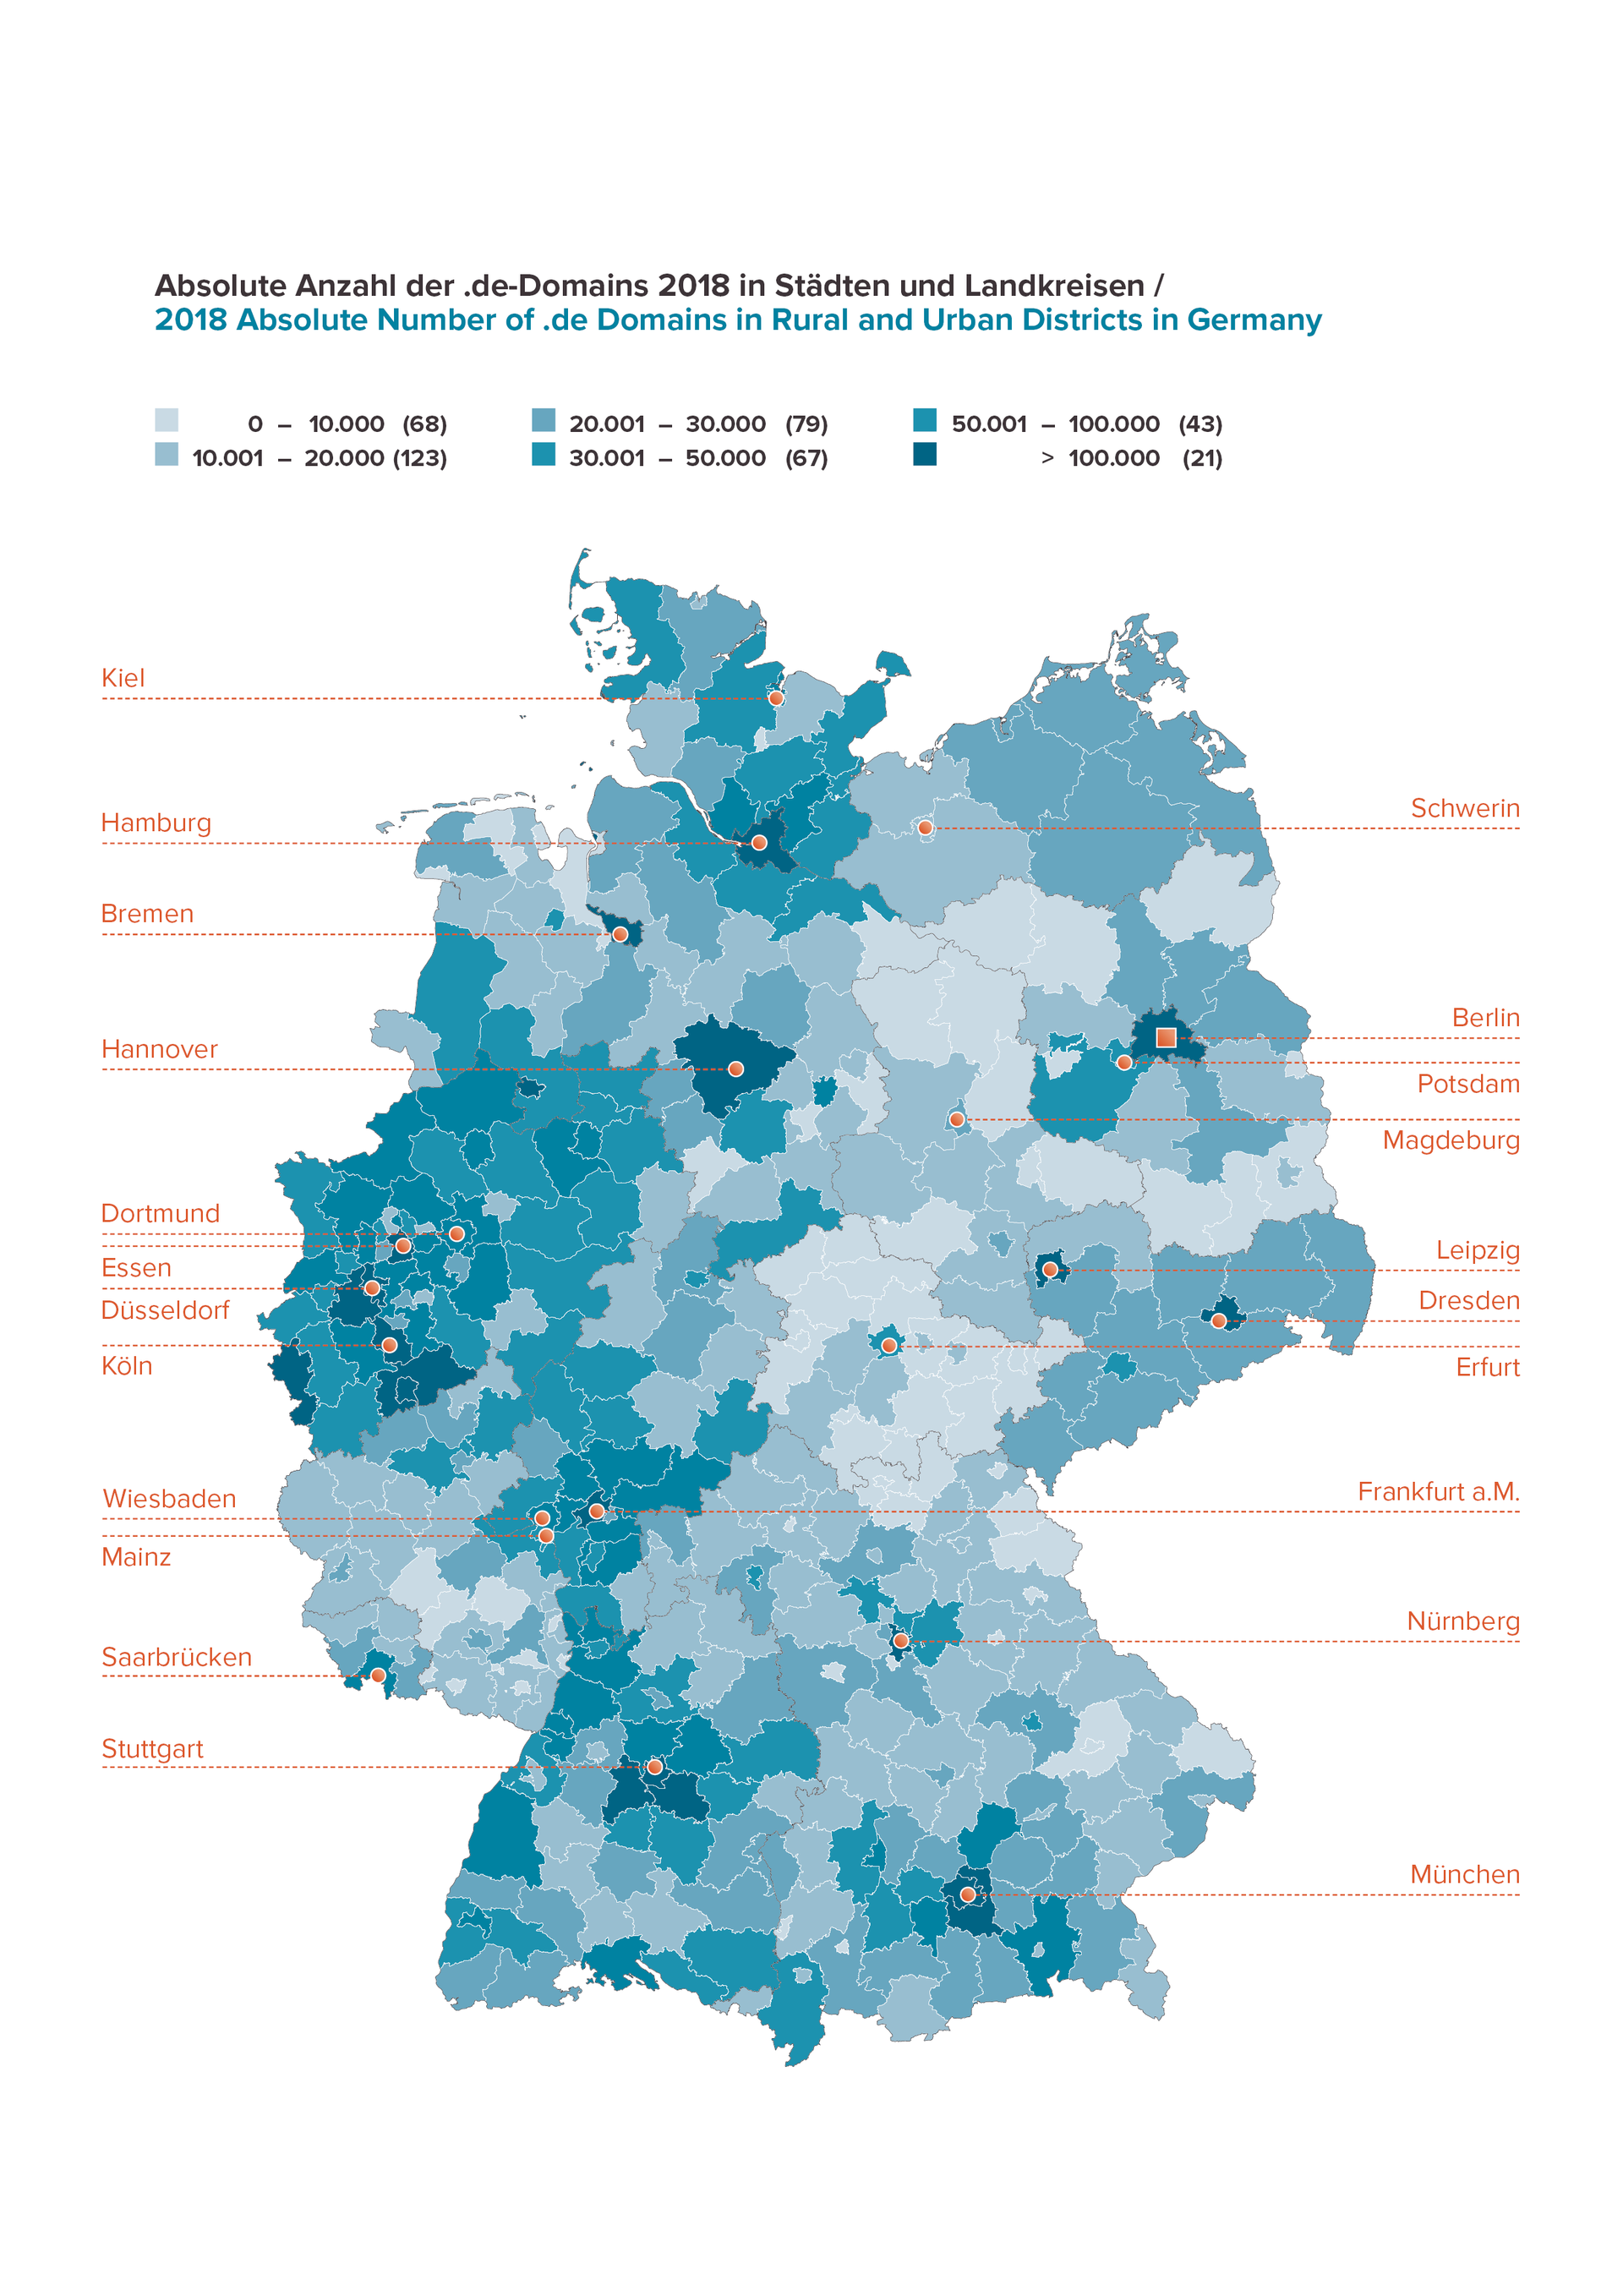 Absolute Number of .de Domains in Cities and Districts in Germany 2018